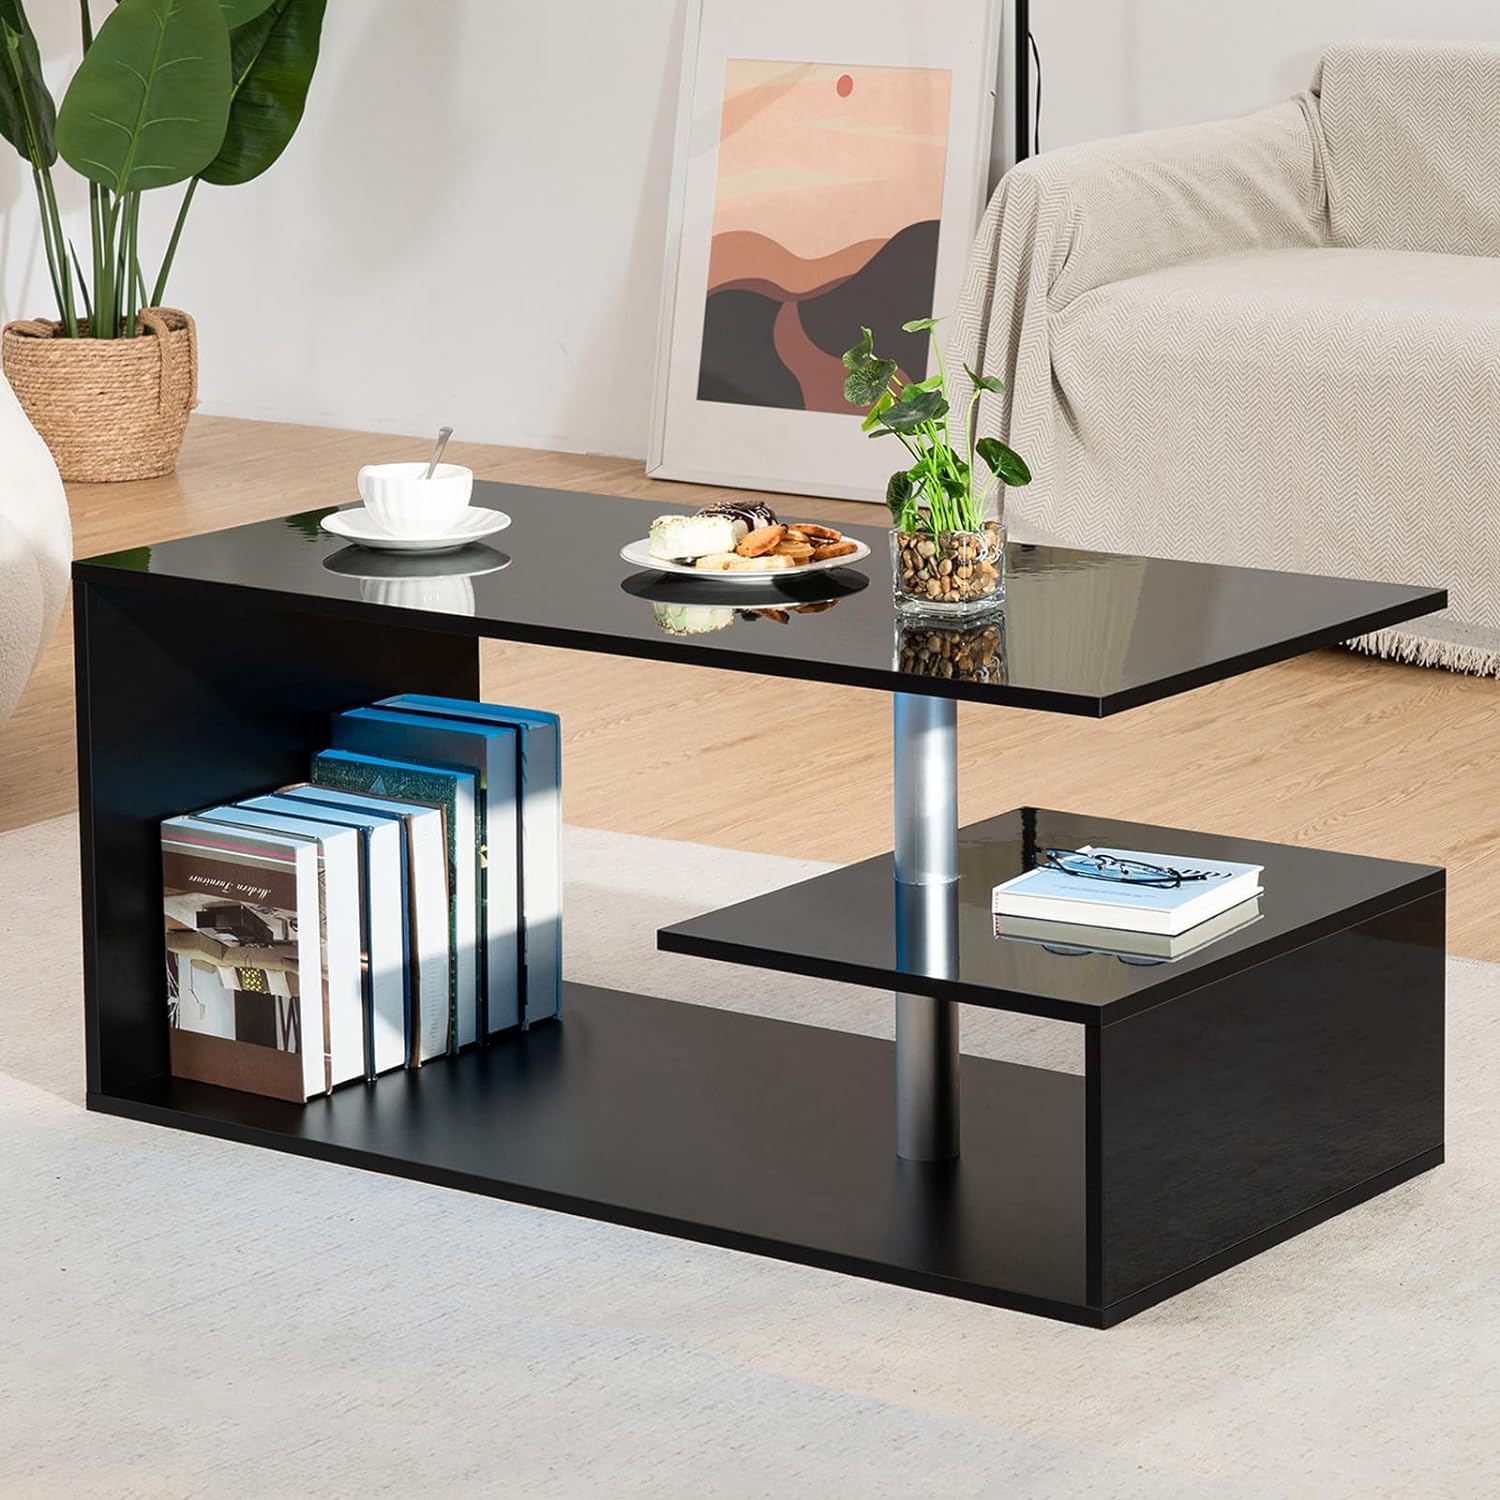 HOMMPA LED Coffee Tables for Living Room Modern Coffee Table with S-Shaped 3 Tiers Open Storage Shelf High Gloss Black Center Sofa Tea Table with LED Lights for Home Office Furniture